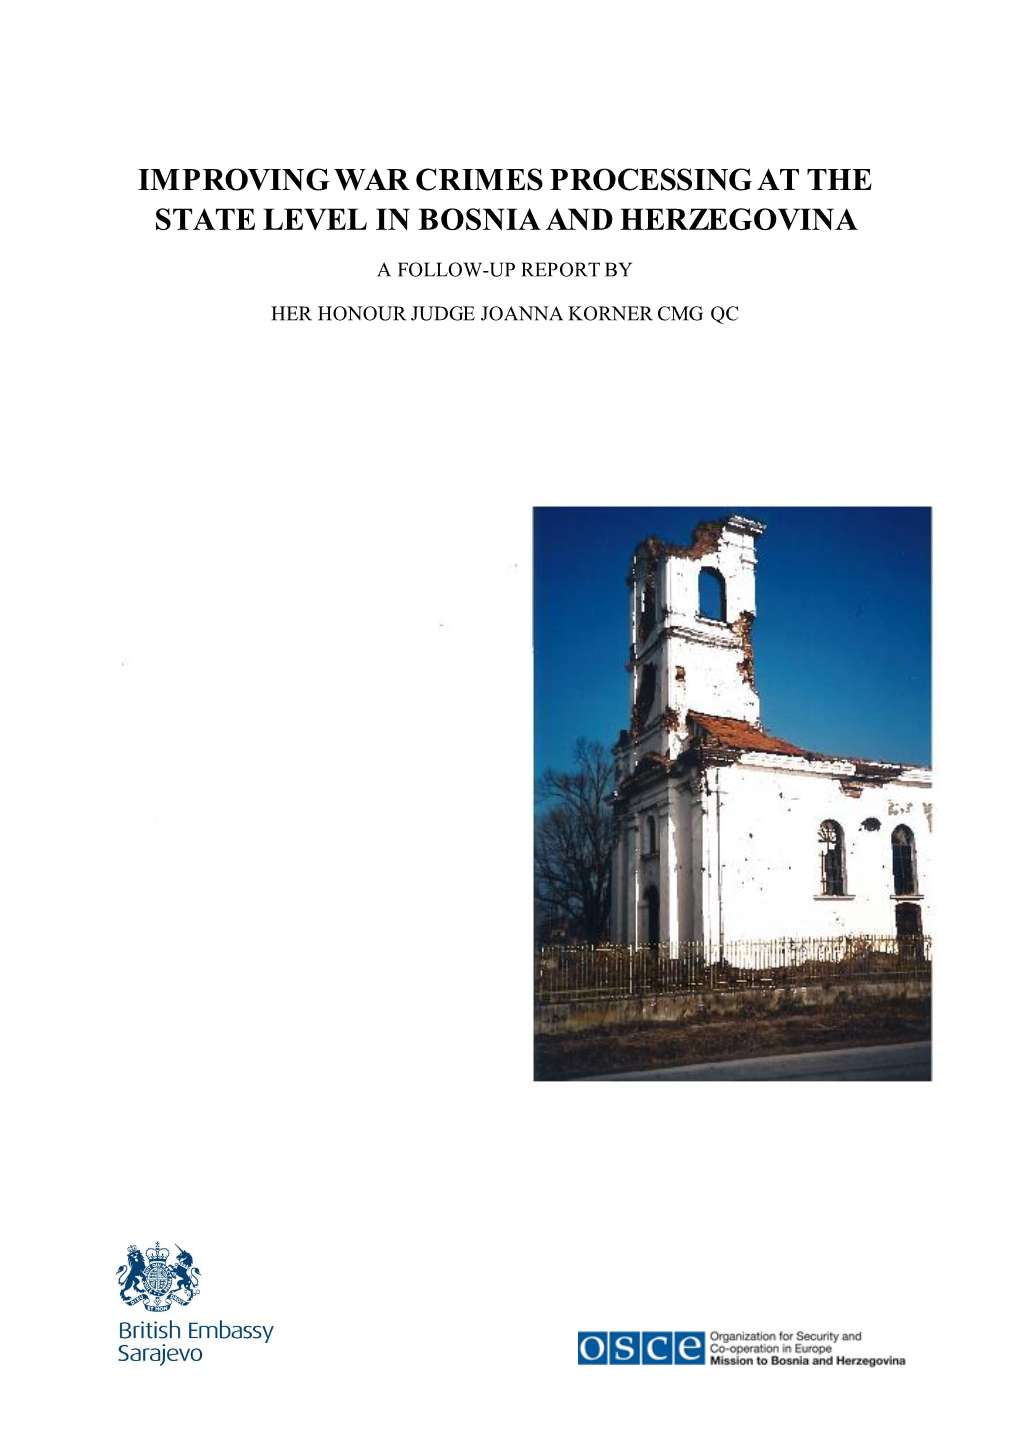 Improving War Crimes Processing at the State Level in Bosnia and Herzegovina